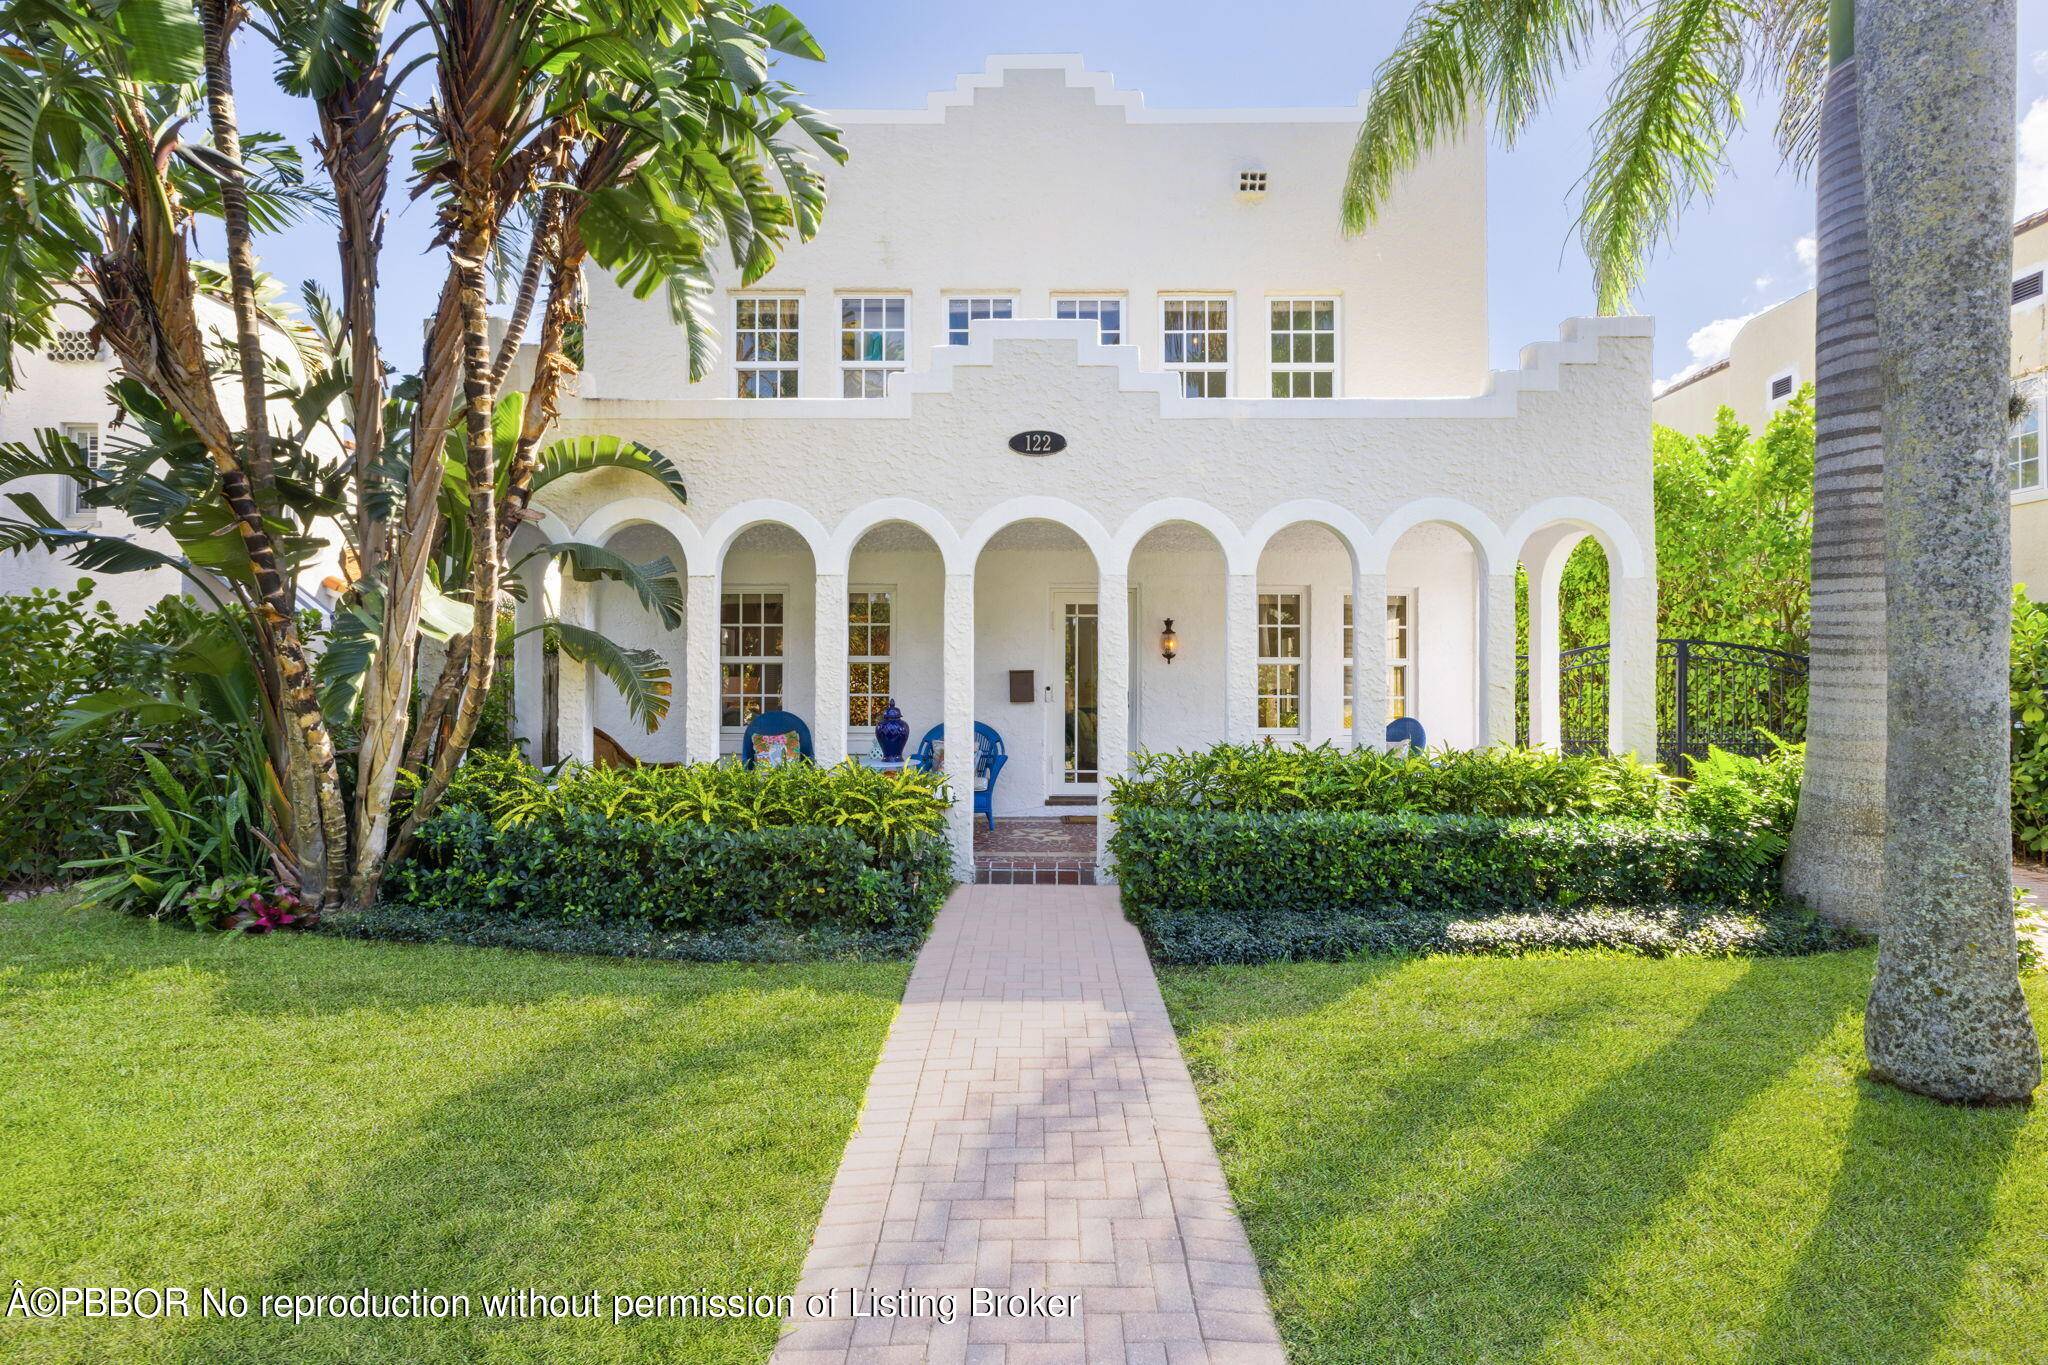 Restored and renovated in 2022, this 1928 Spanish Mission Style Home on the lake block of Historic Prospect Park is light, bright and situated on a tranquil street.